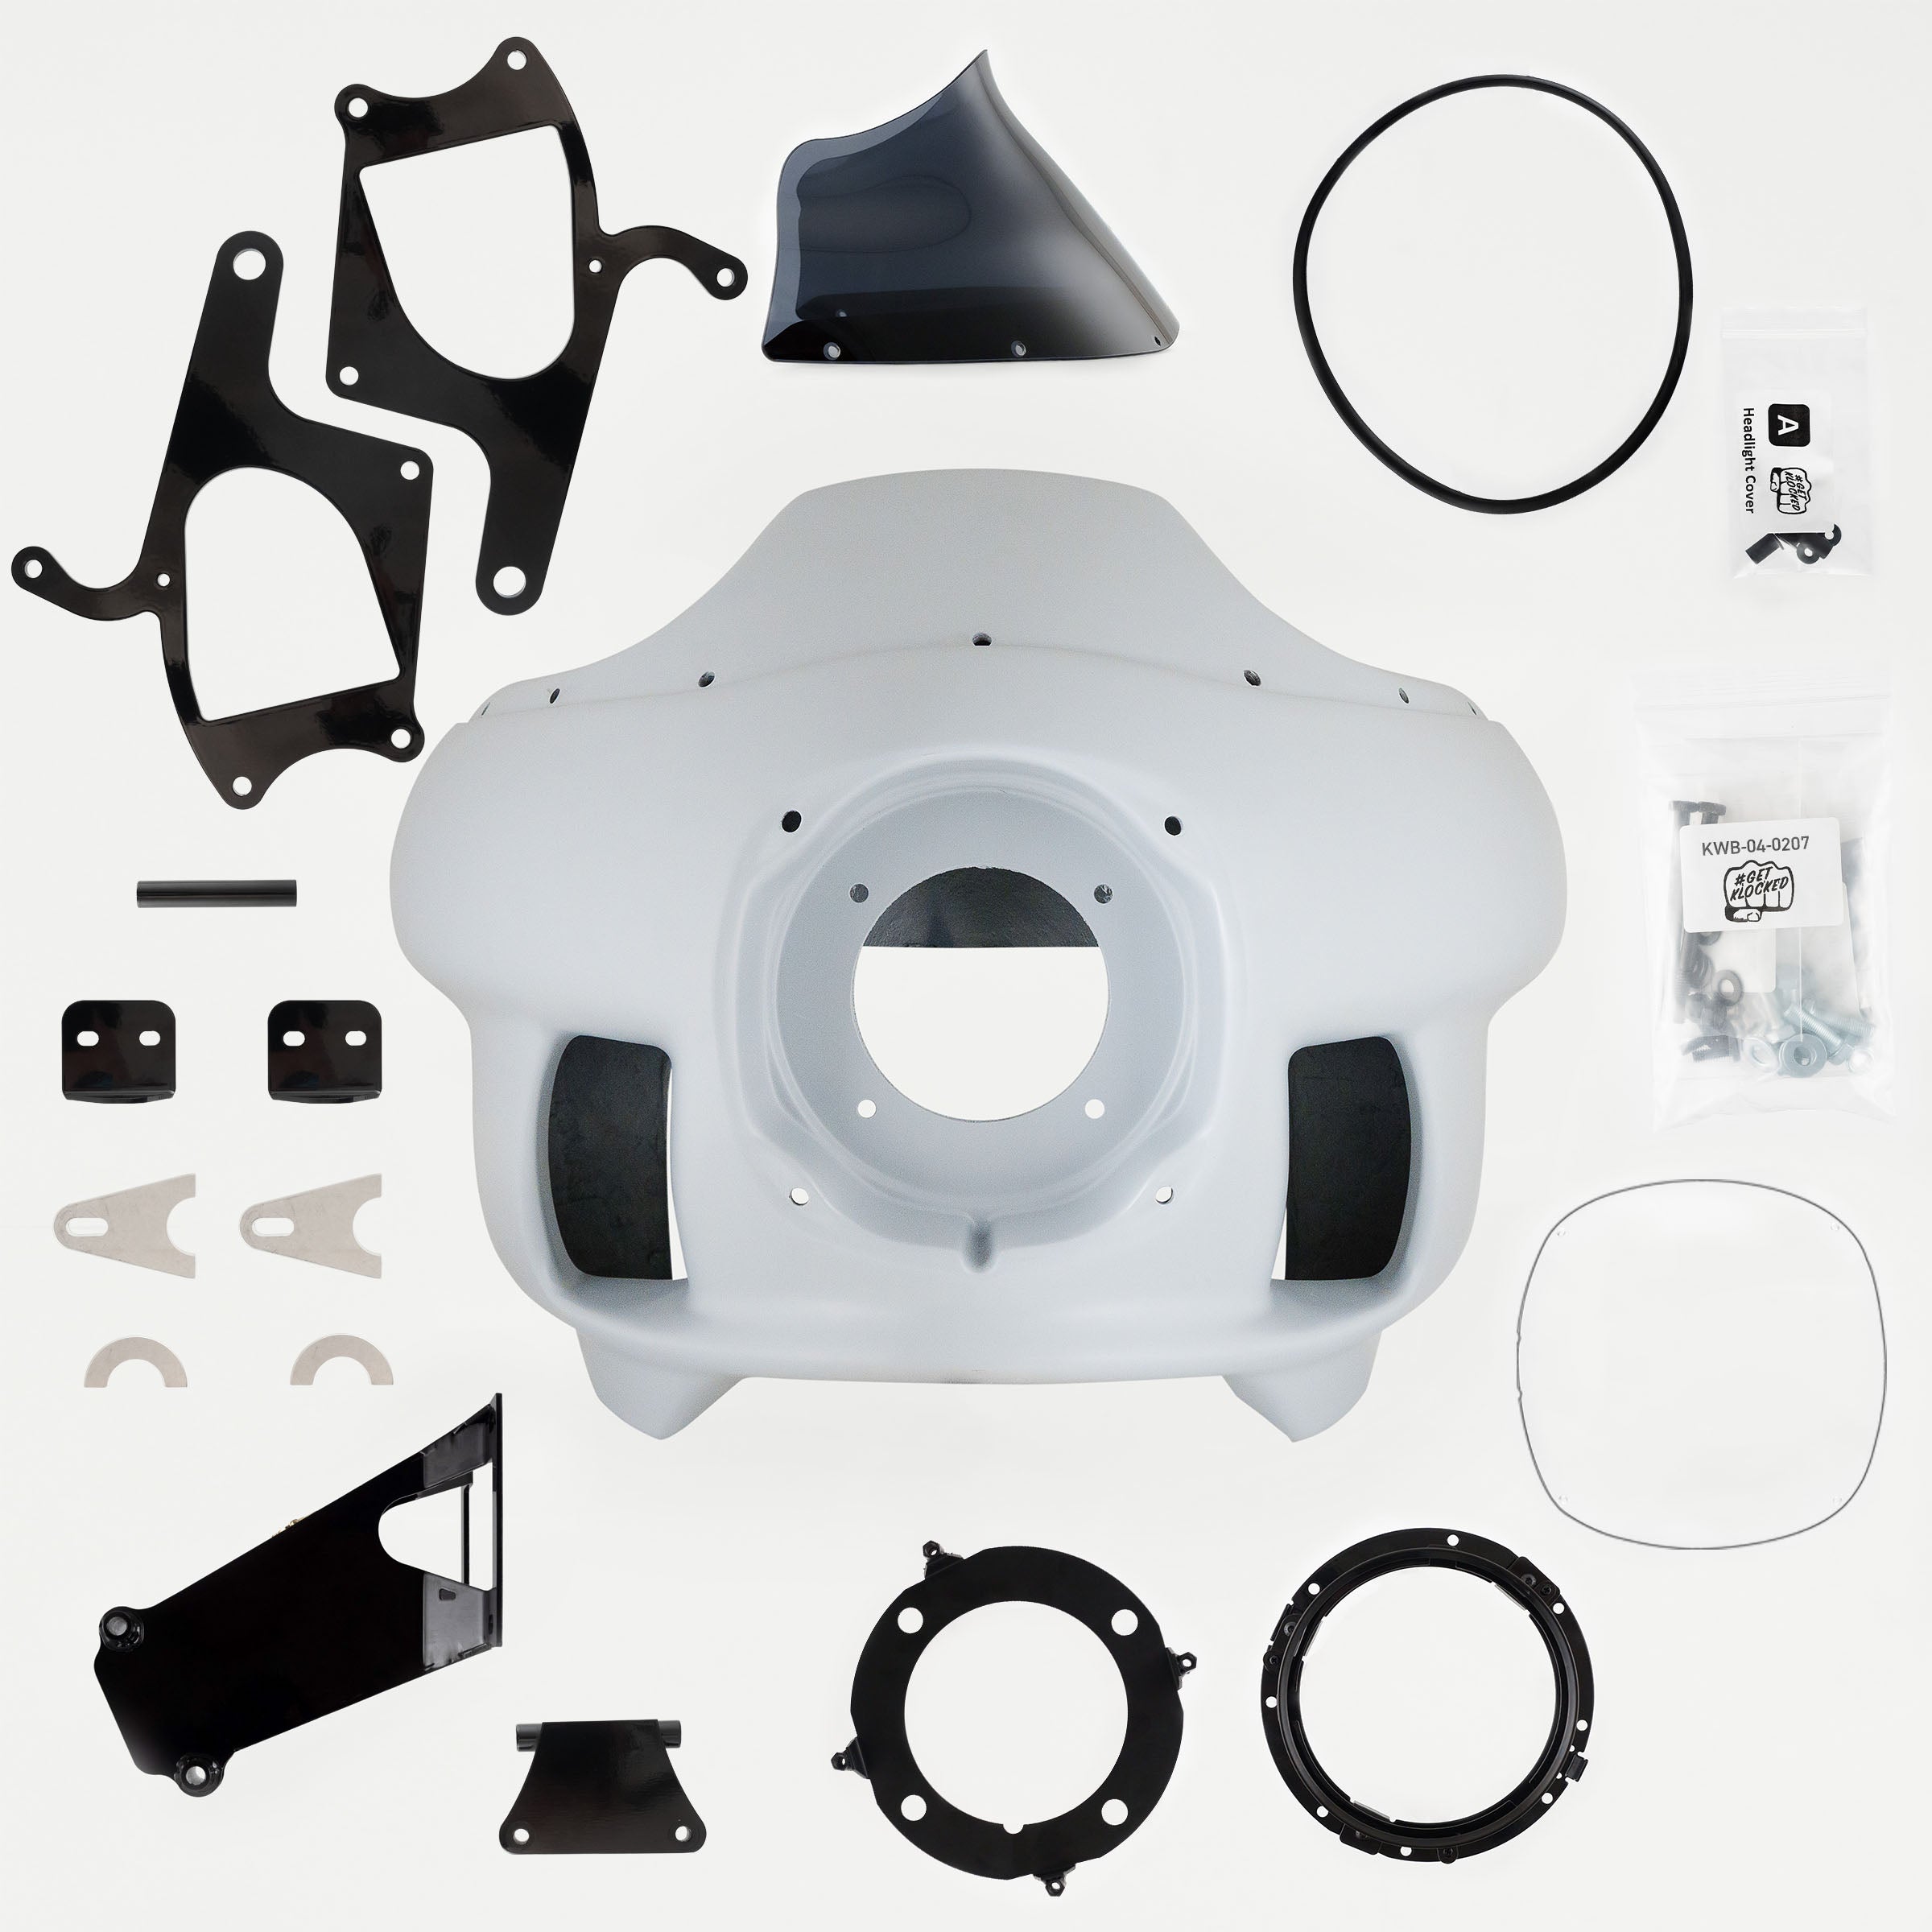 Complete Fit Kit of Harley-Davidson FXRP Fairing Fit Kit for 2016-2023 Indian Springfield Motorcycles (Complete Fit Kit for 2016-2023 Indian Springfield)